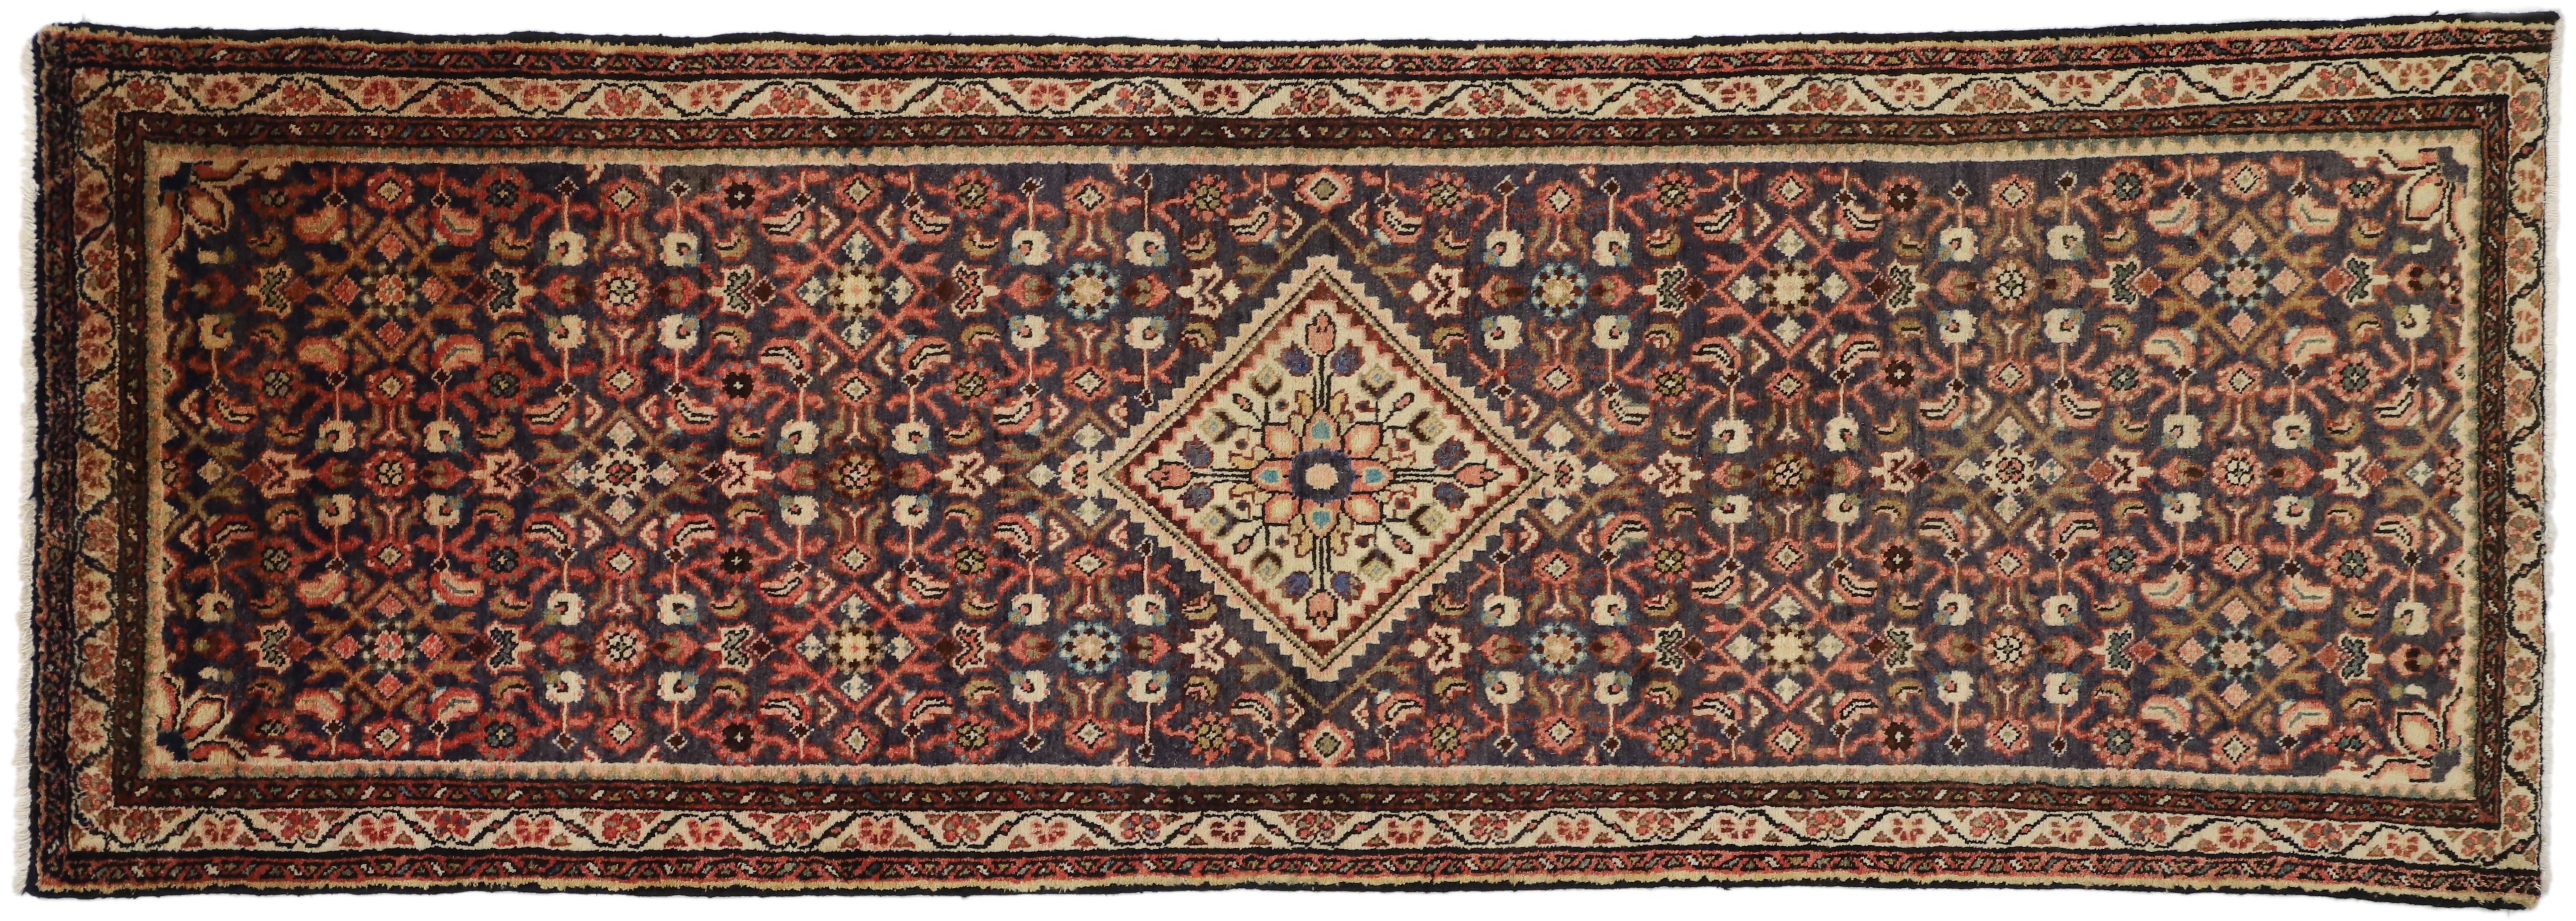 Vintage Persian Hamadan Hallway Runner with Rustic Arts & Crafts Style For Sale 2